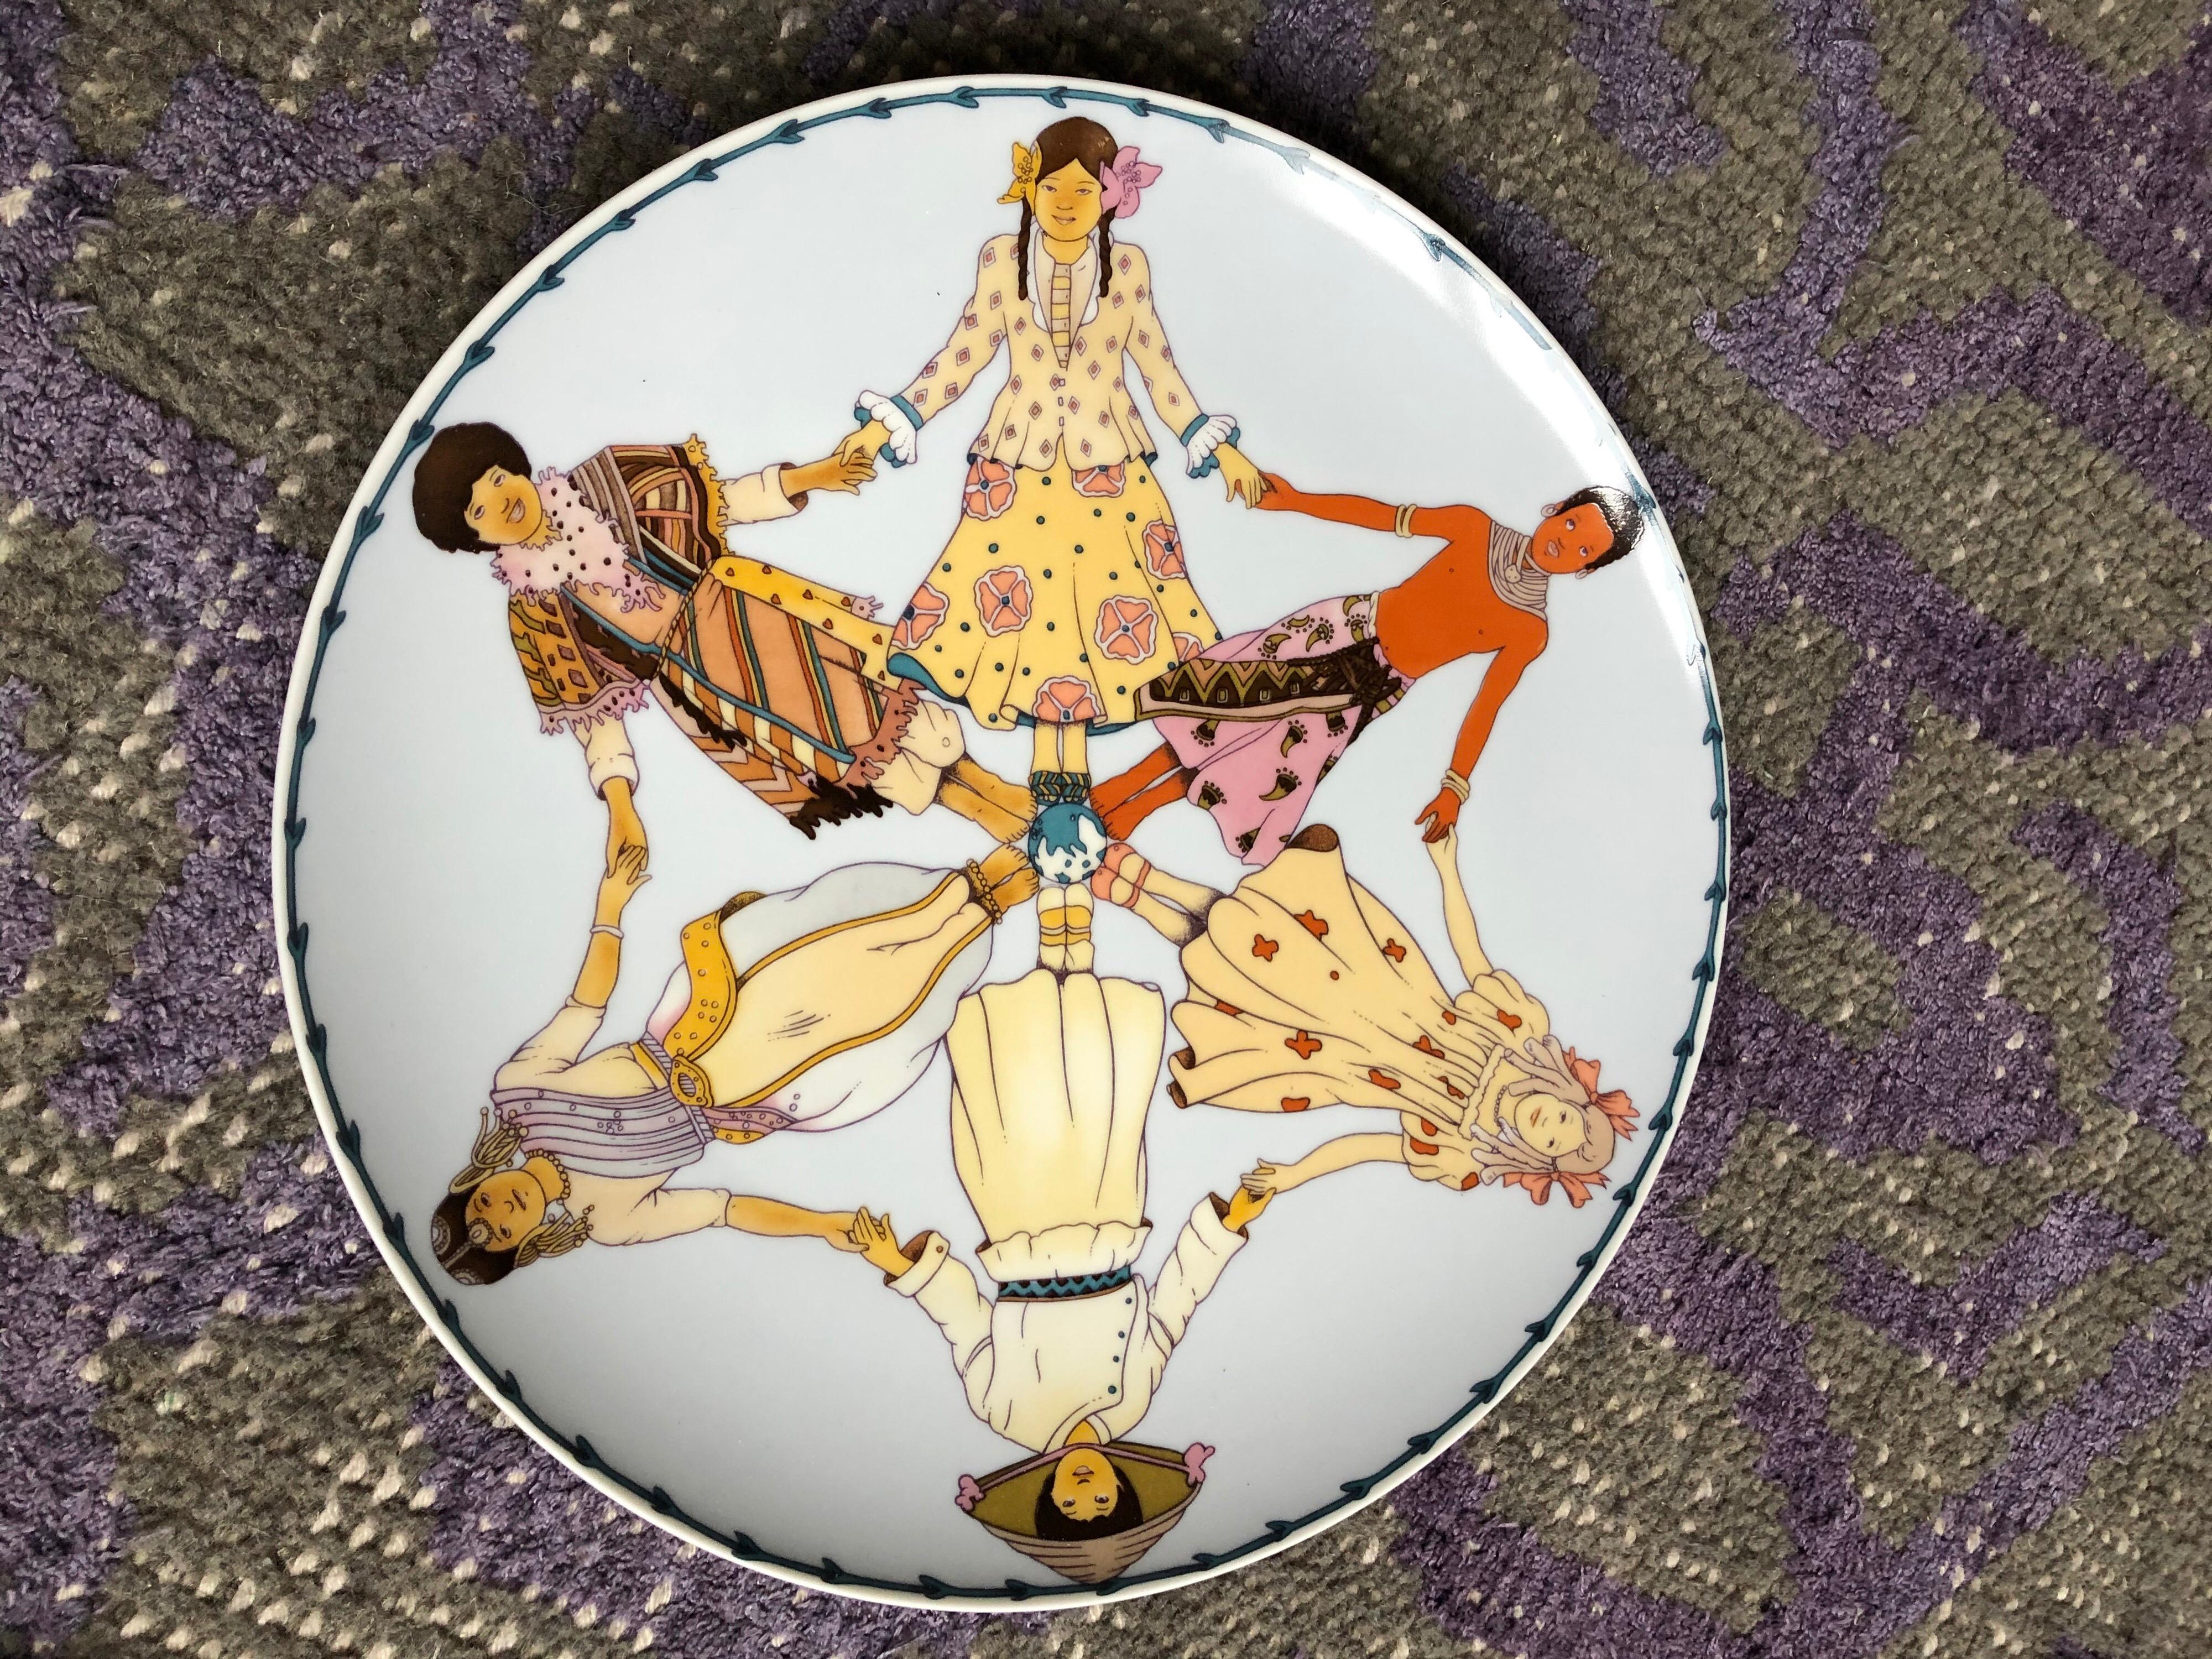 Contemporary 6 Plates “Children of the World” Villeroy & Boch 1979 for Unicef, Germany SALE 